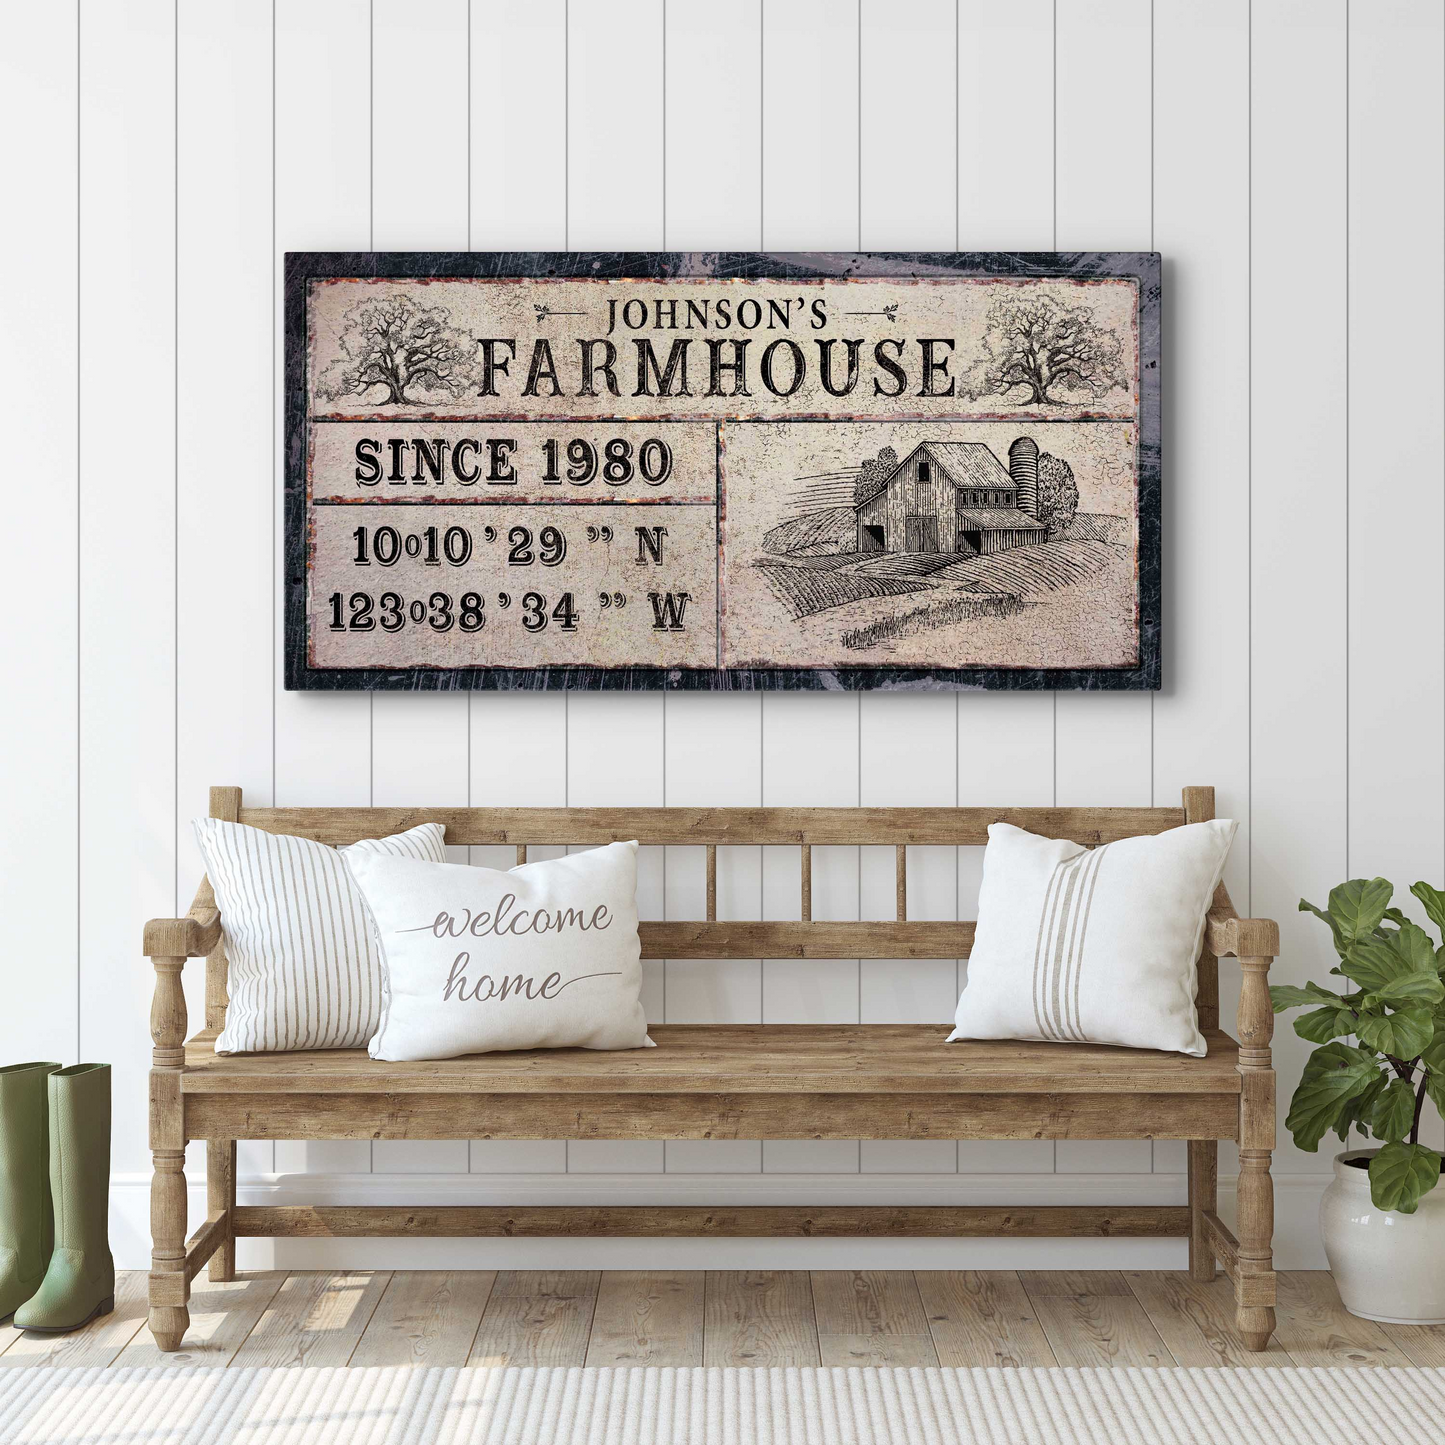 Farmhouse Signs VI - Image by Tailored Canvases